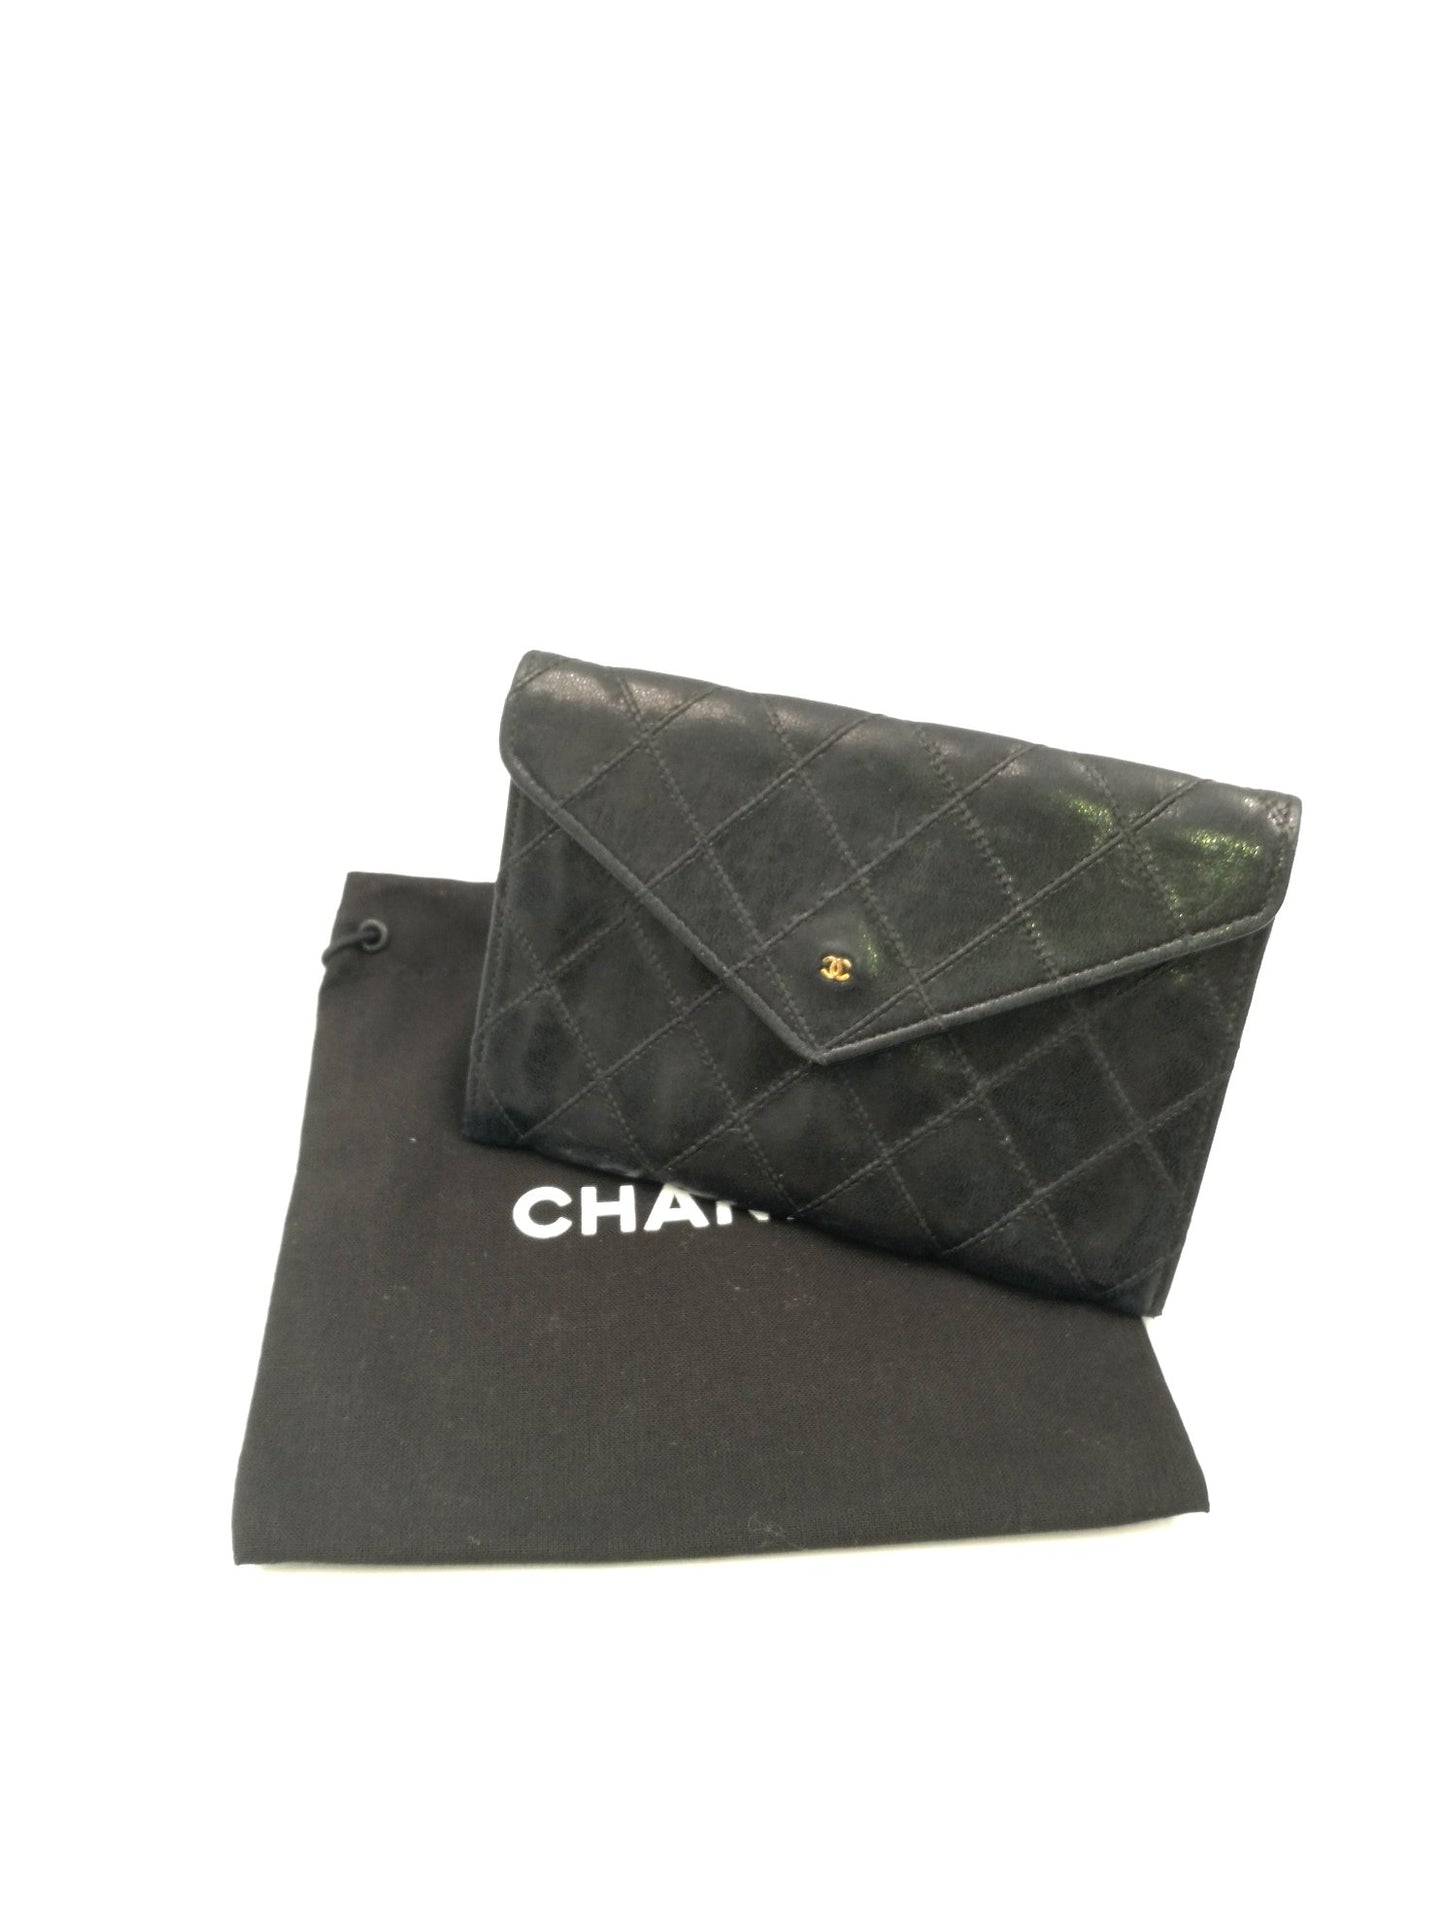 Chanel Cc coin wallet